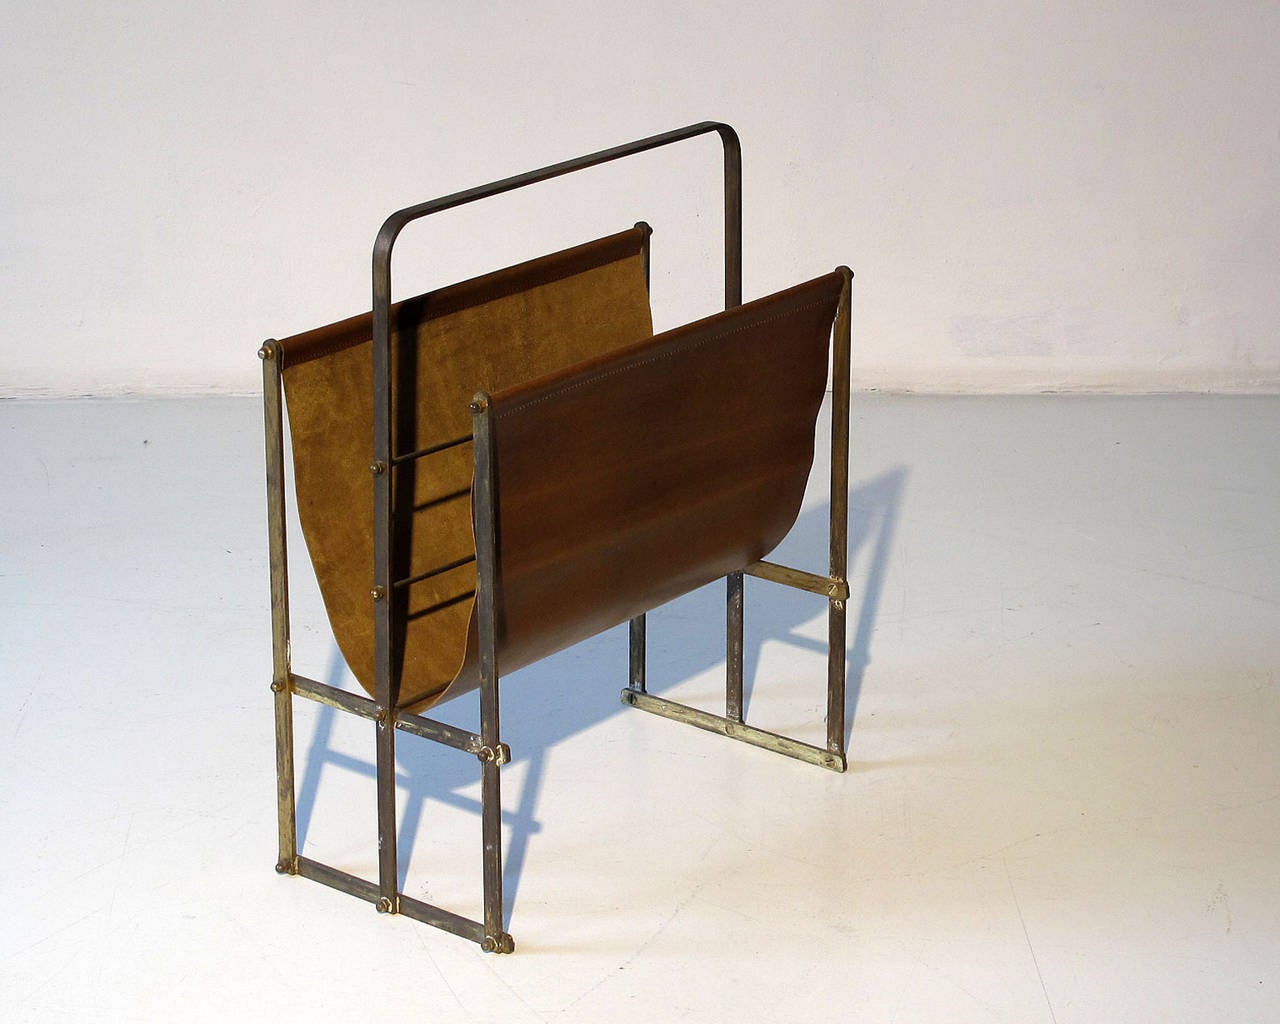 Mid-Century Modern, most probably Austrian 1950s magazine rack.
Structure in solid brass with leather sling. Leather has been replaced.
The brass structure is held together by numerous screws, showing this object has been entirely handmade.